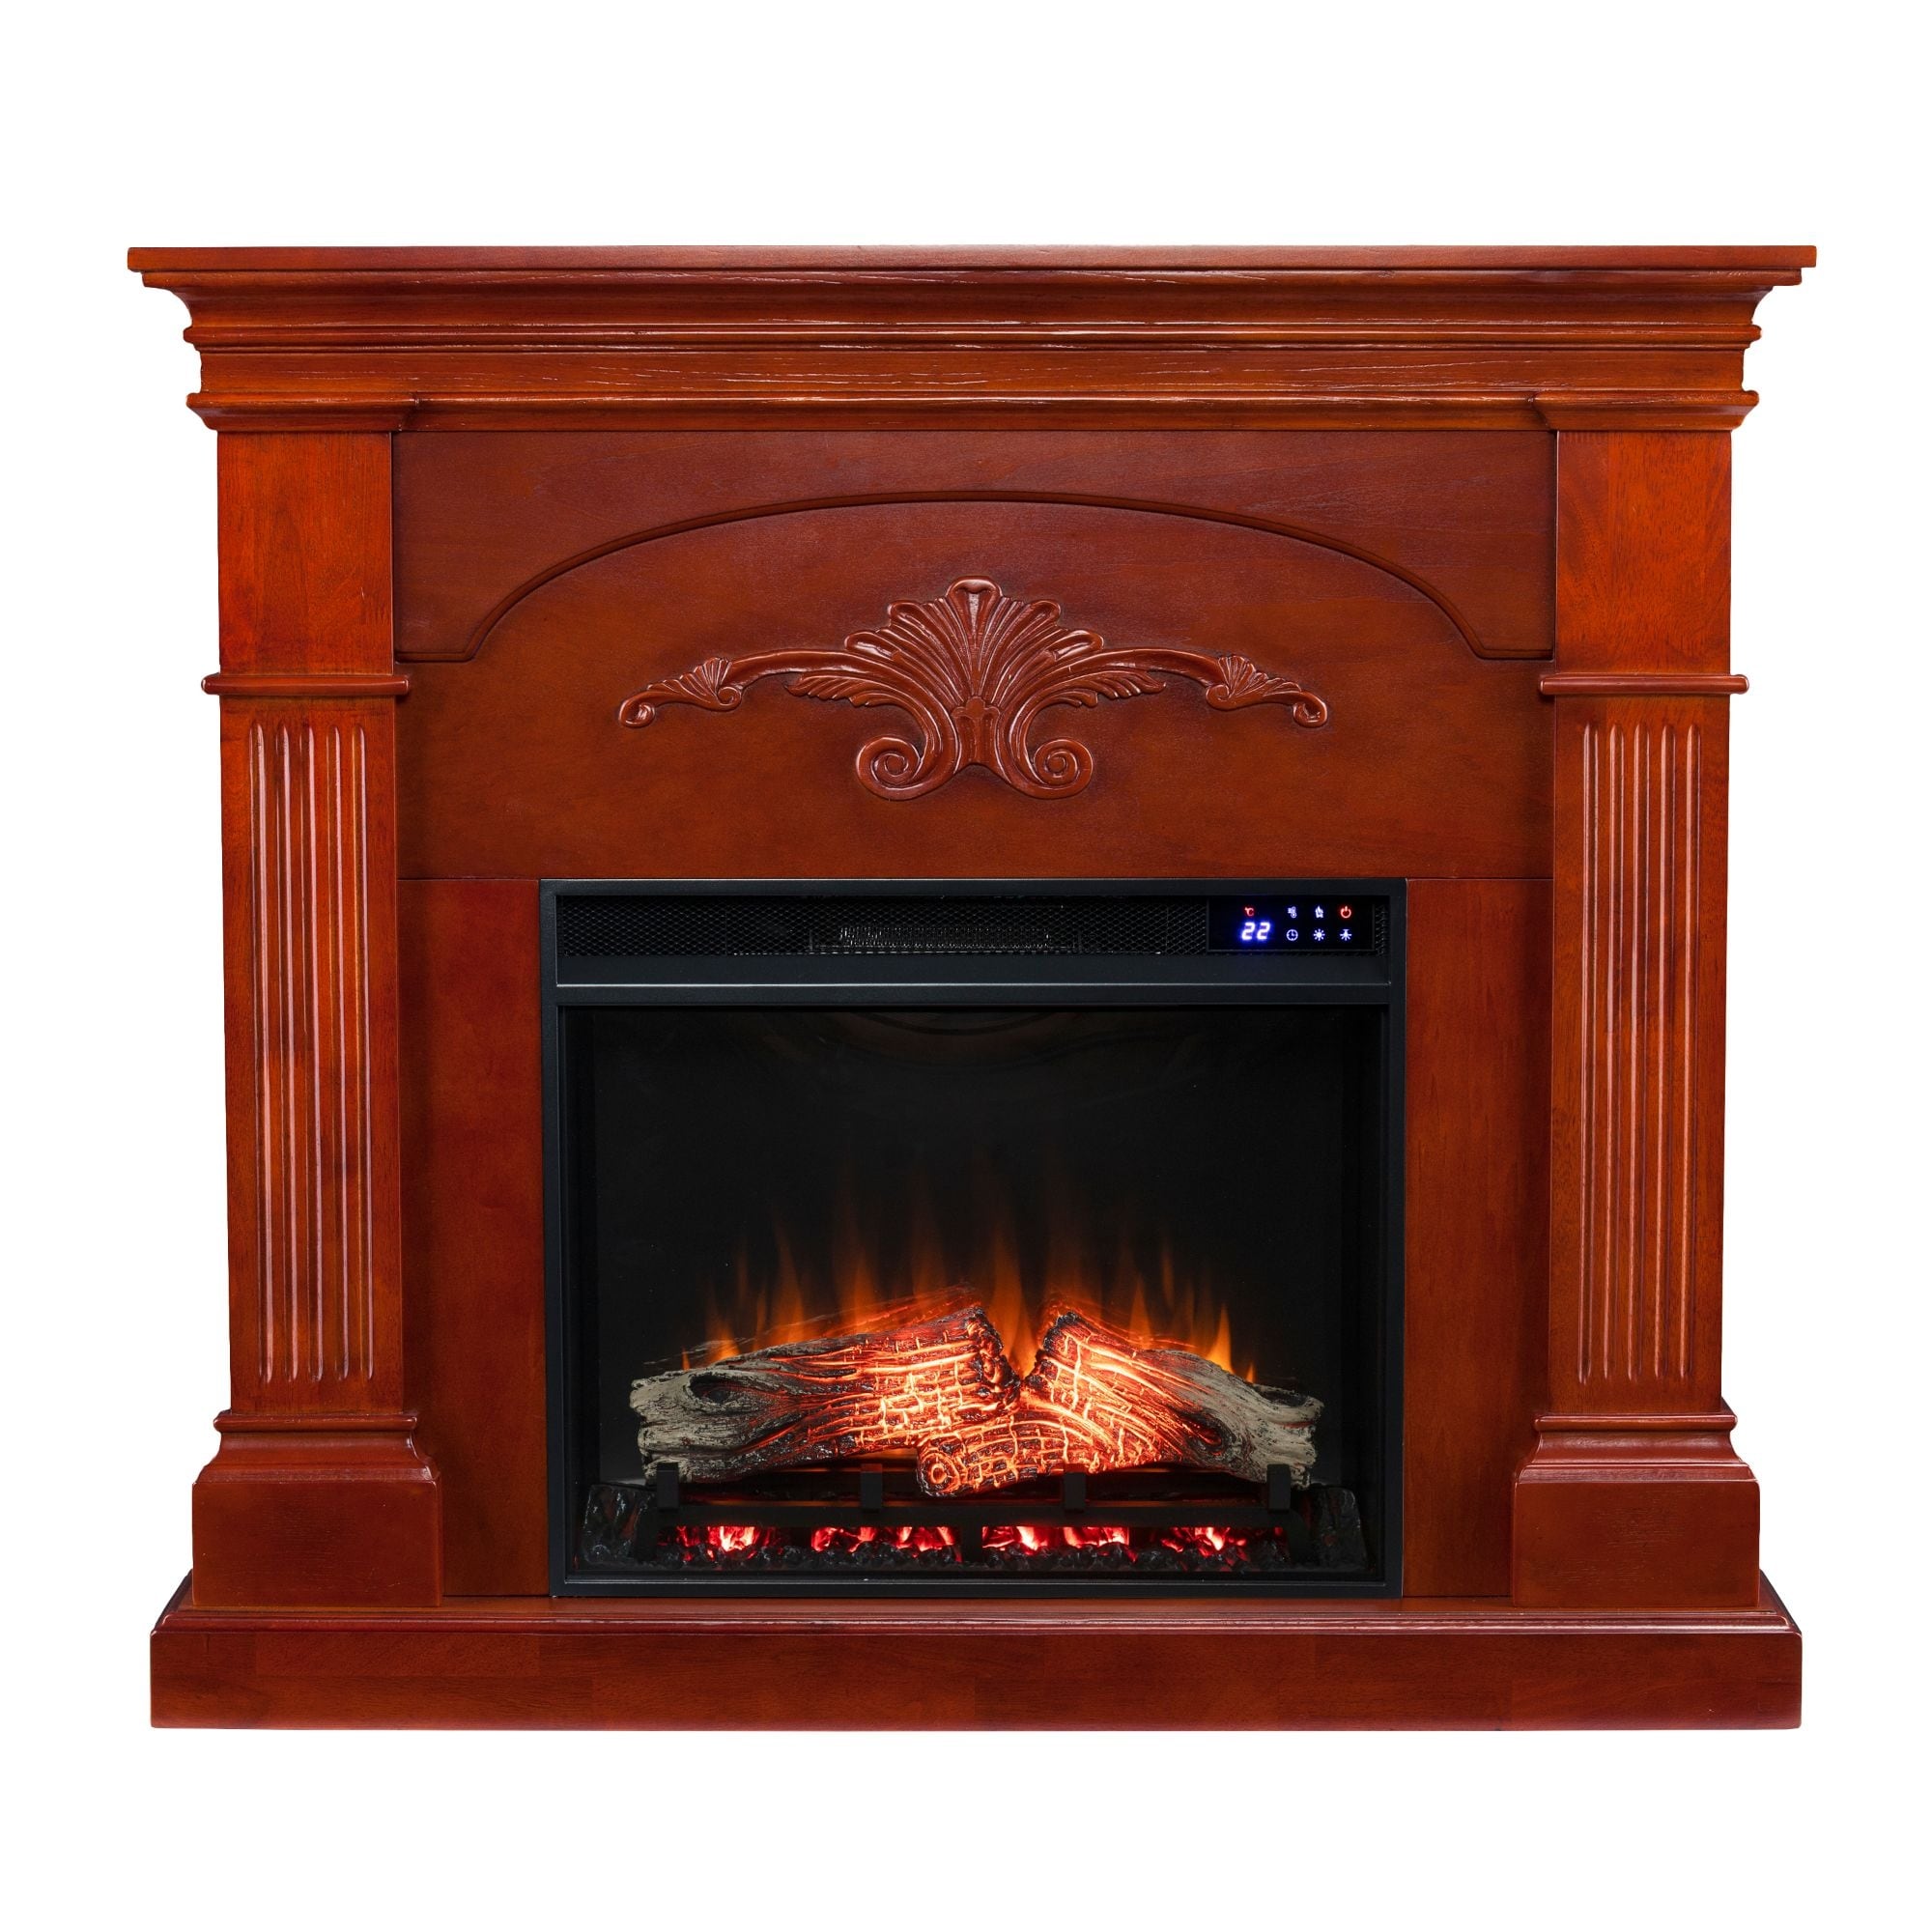 Southern Enterprises 44.75 inch Mahogany Brown and Black Classic Style Floral Electric Fireplace